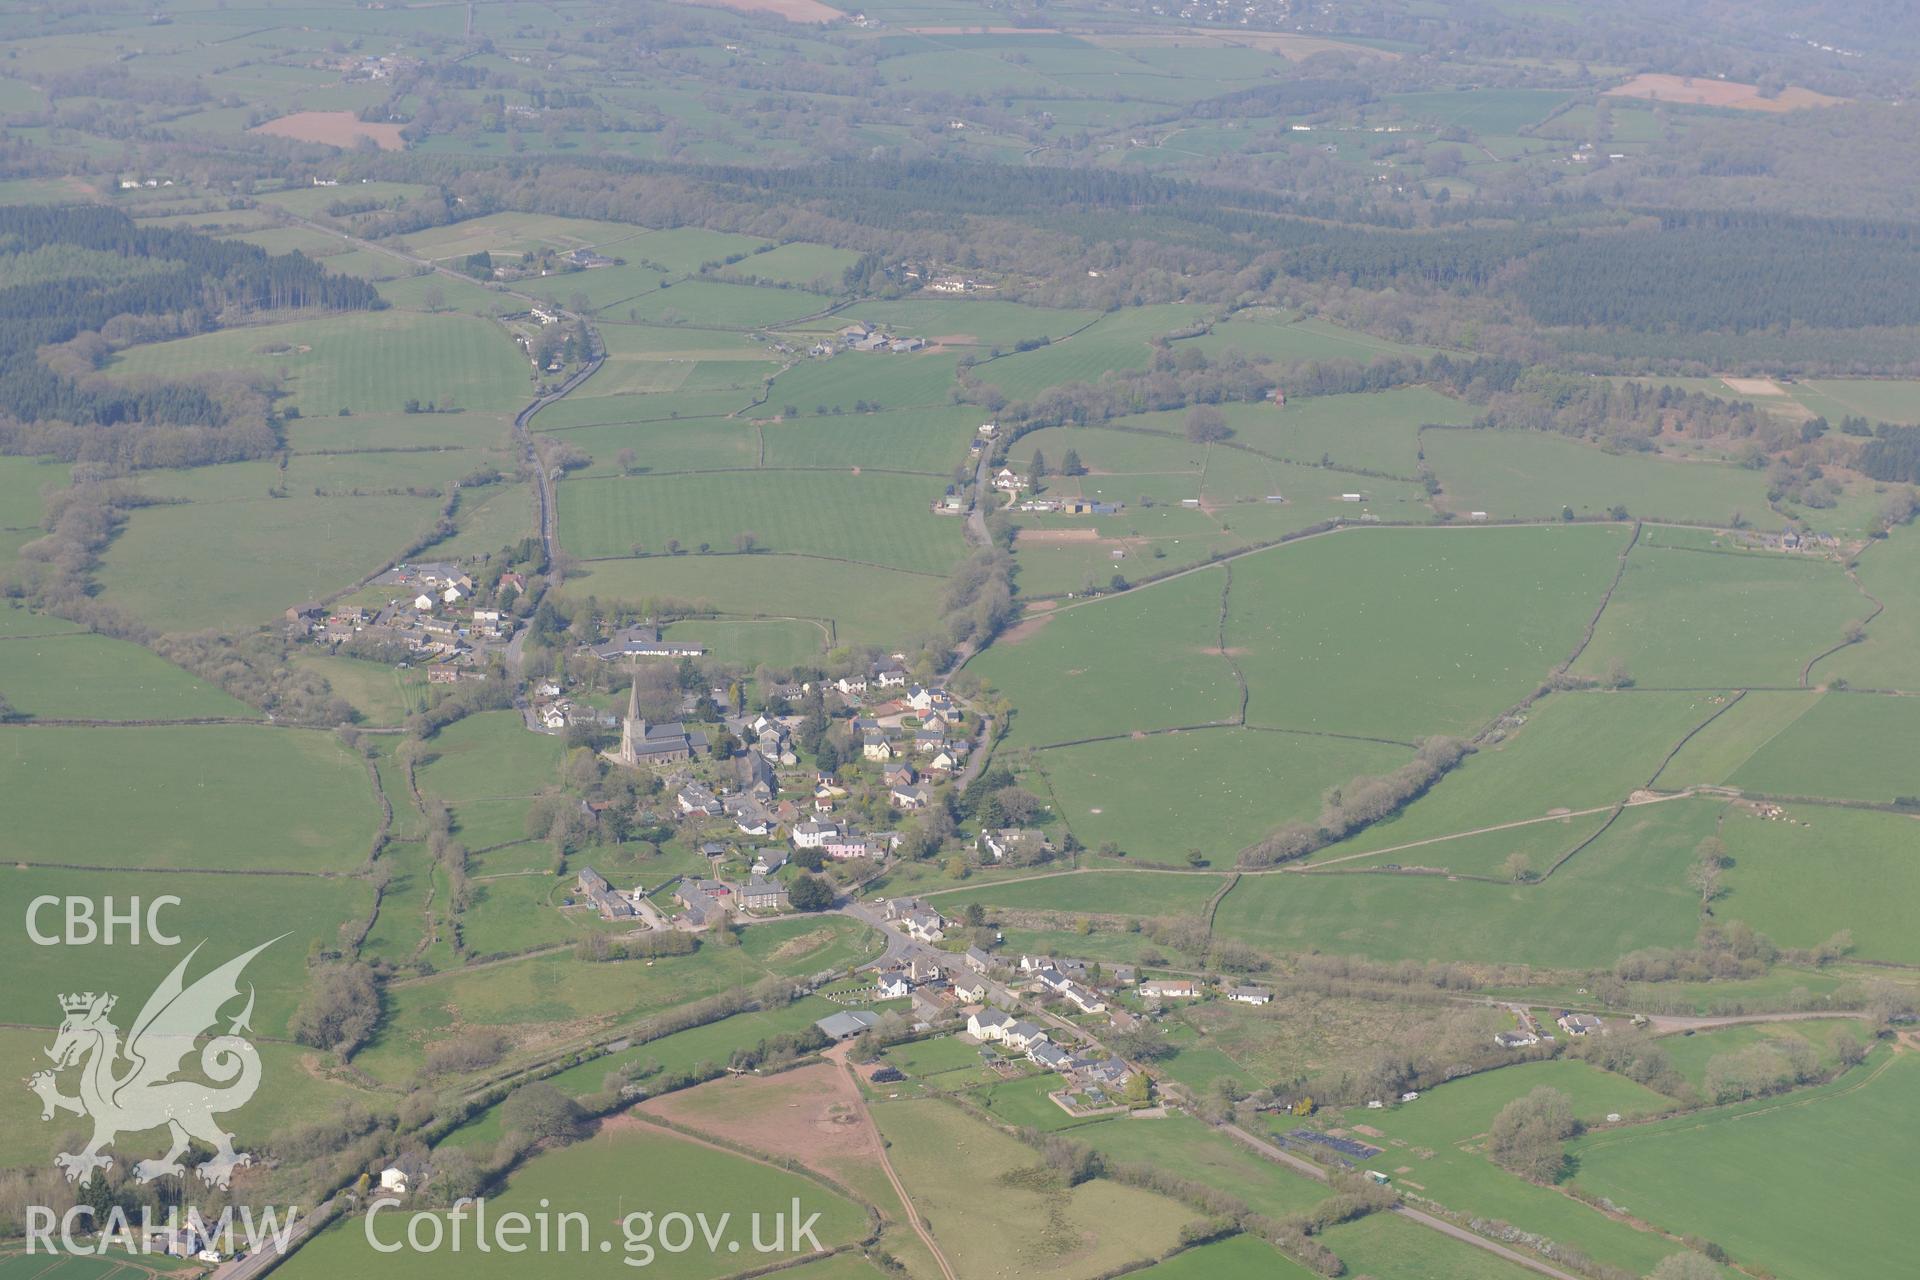 Trellech village and medieval borough including St. Nicholas' Church and the Vicarage; medieval houses sites west of the Church, Trellech motte, the Lion Inn and Old Village School. Oblique aerial photograph taken during the Royal Commission's programme of archaeological aerial reconnaissance by Toby Driver on 21st April 2015.